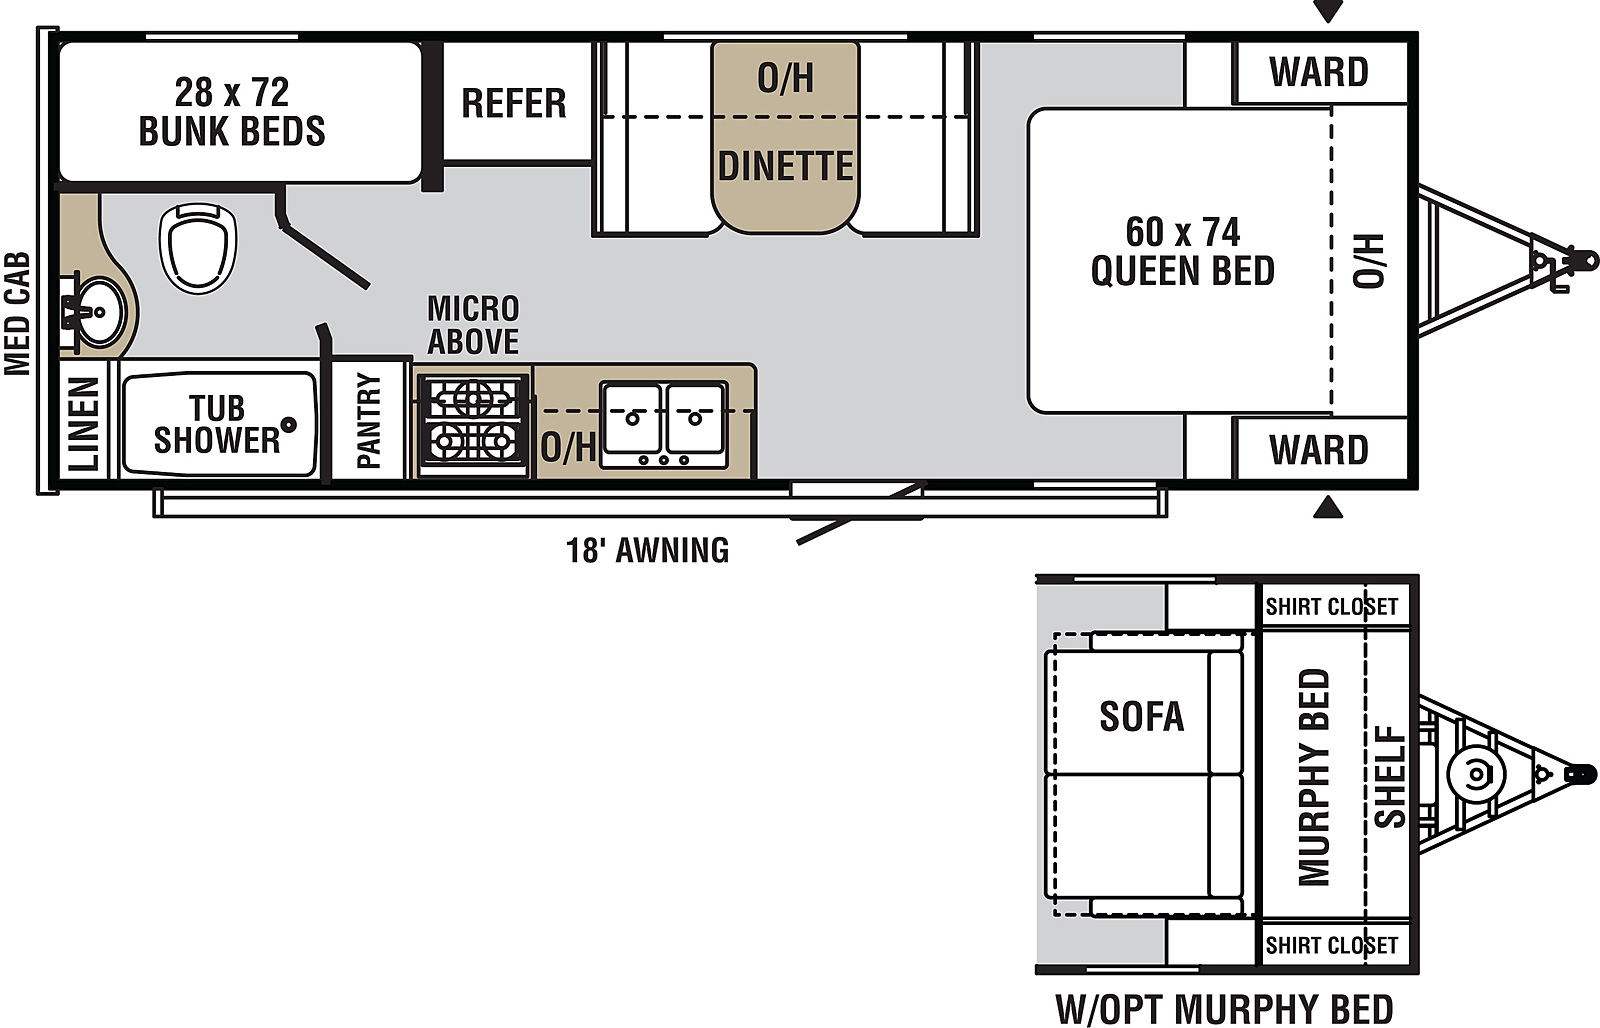 Viking Ultra-Lite 21SBH floorplan. The 21SBH has no slide outs and one entry door.